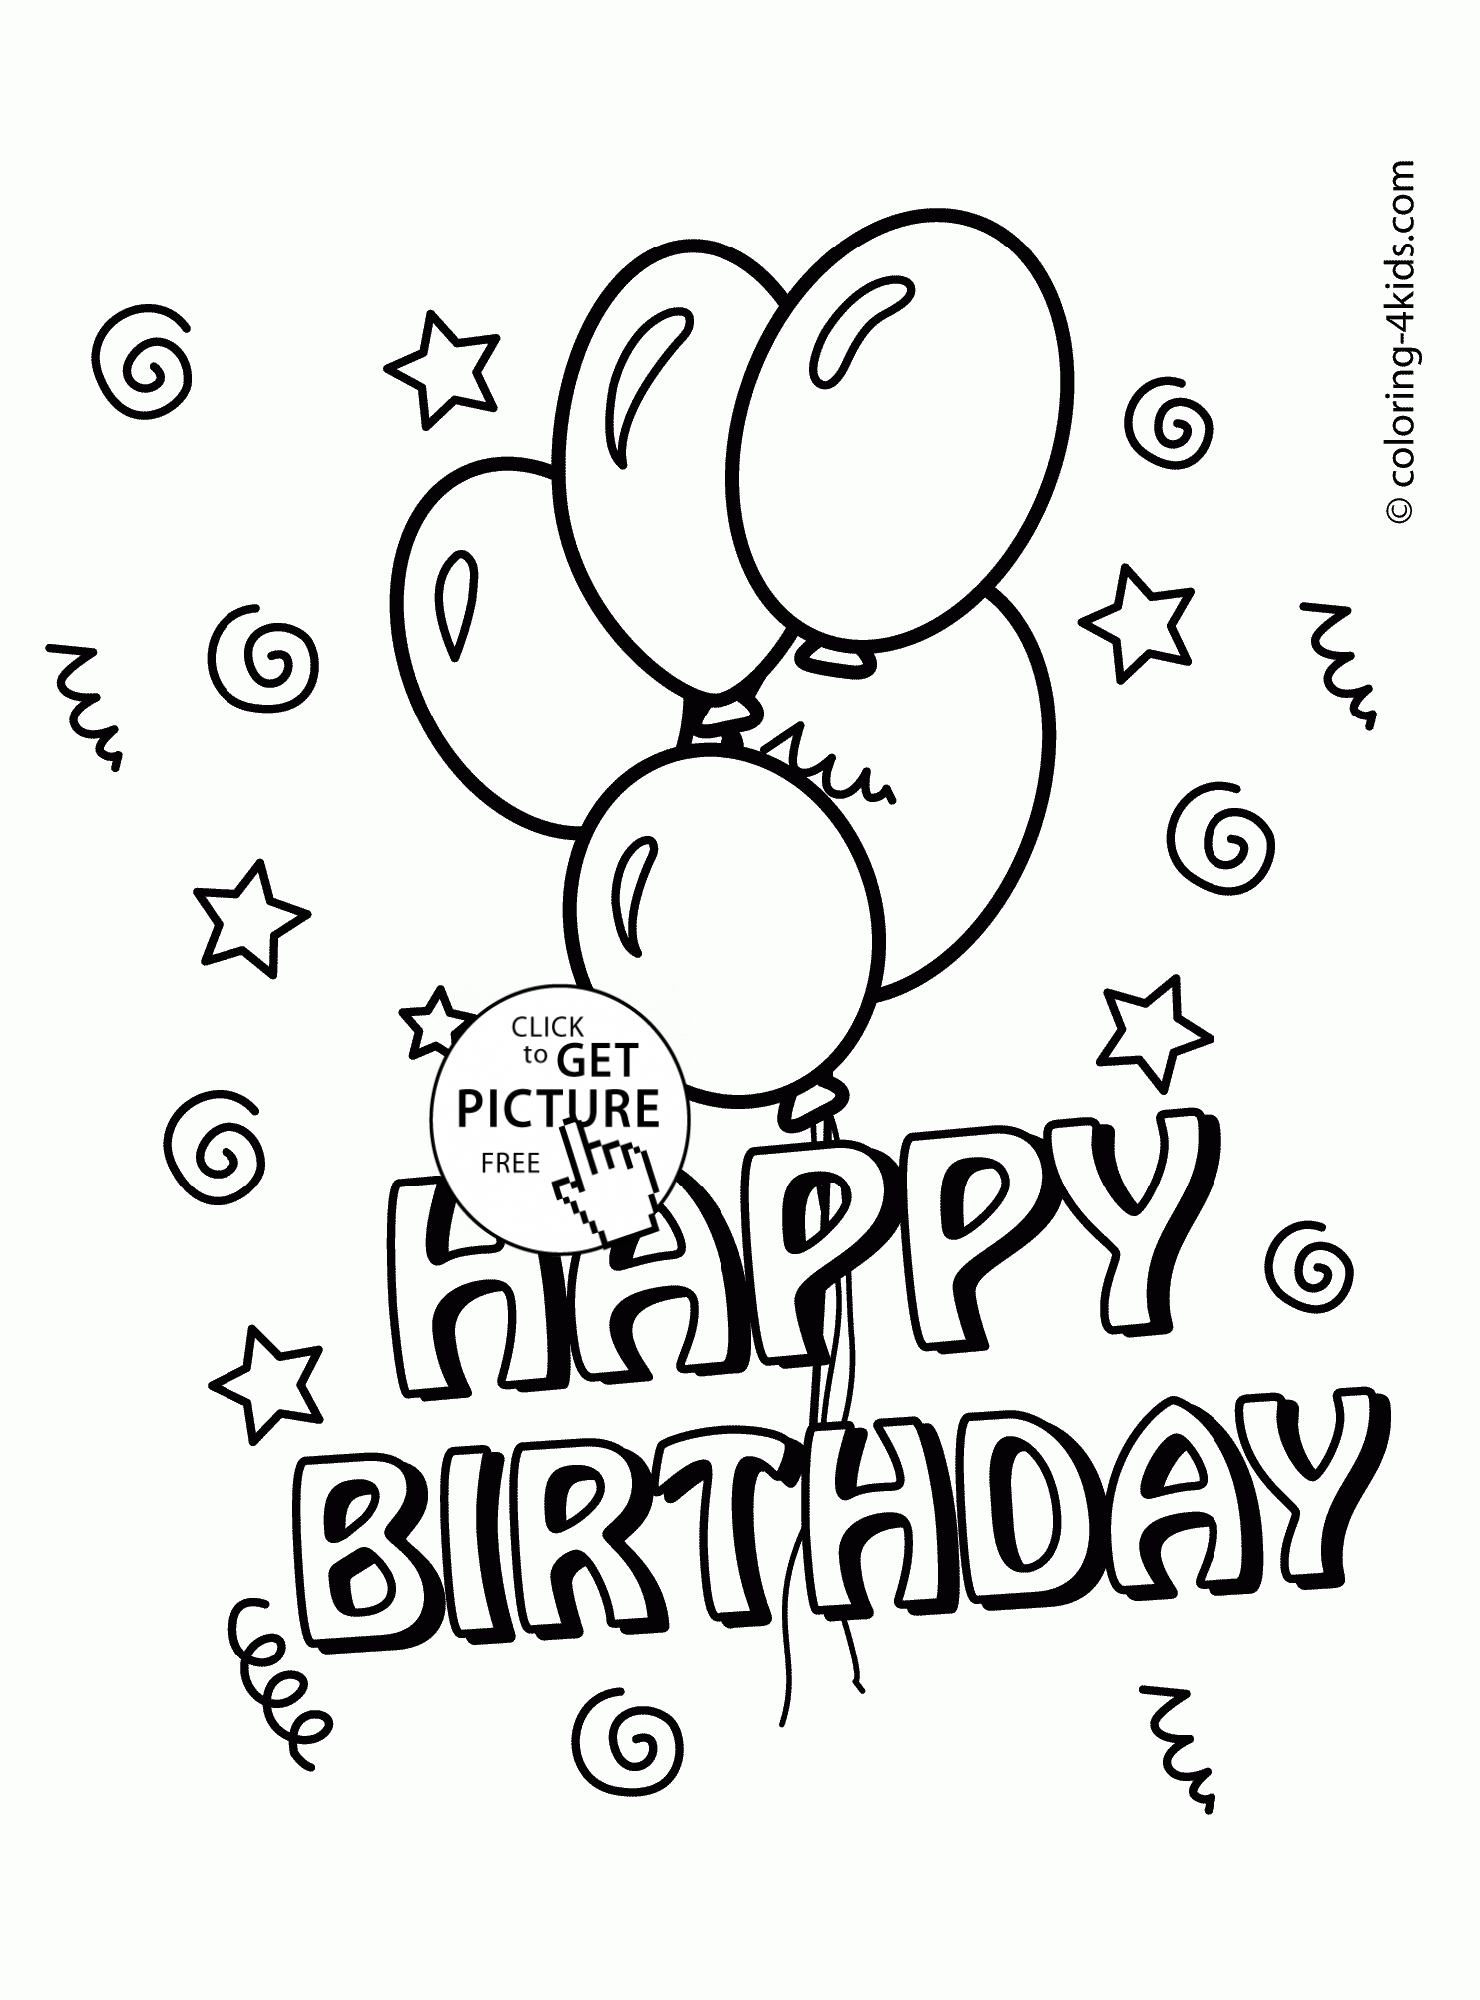 Ideas For Birthday Cards For Dad Birthday Card Drawing At Getdrawings Free For Personal Use